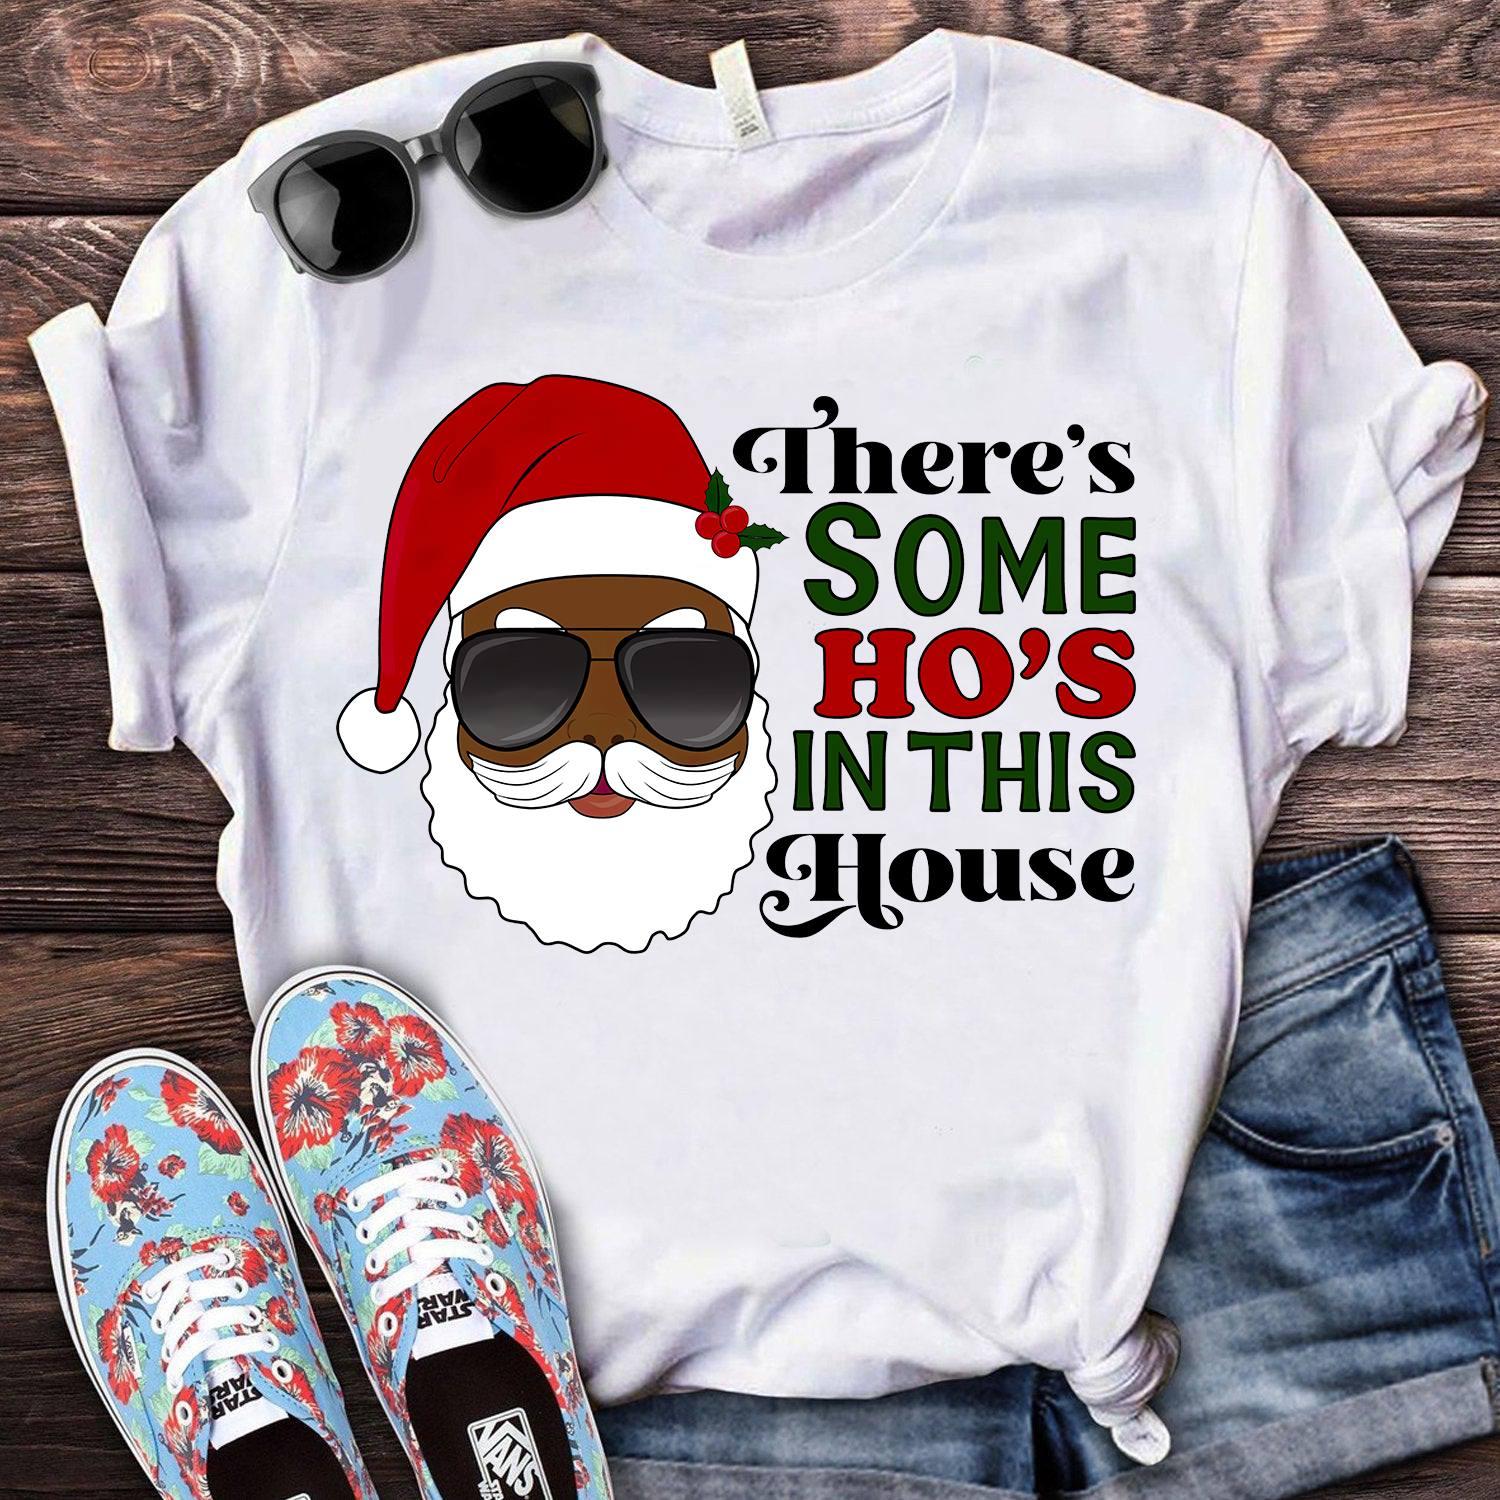 There's some ho's in this house - Black Santa Claus, Christmas ugly sweater, gift for Christmas